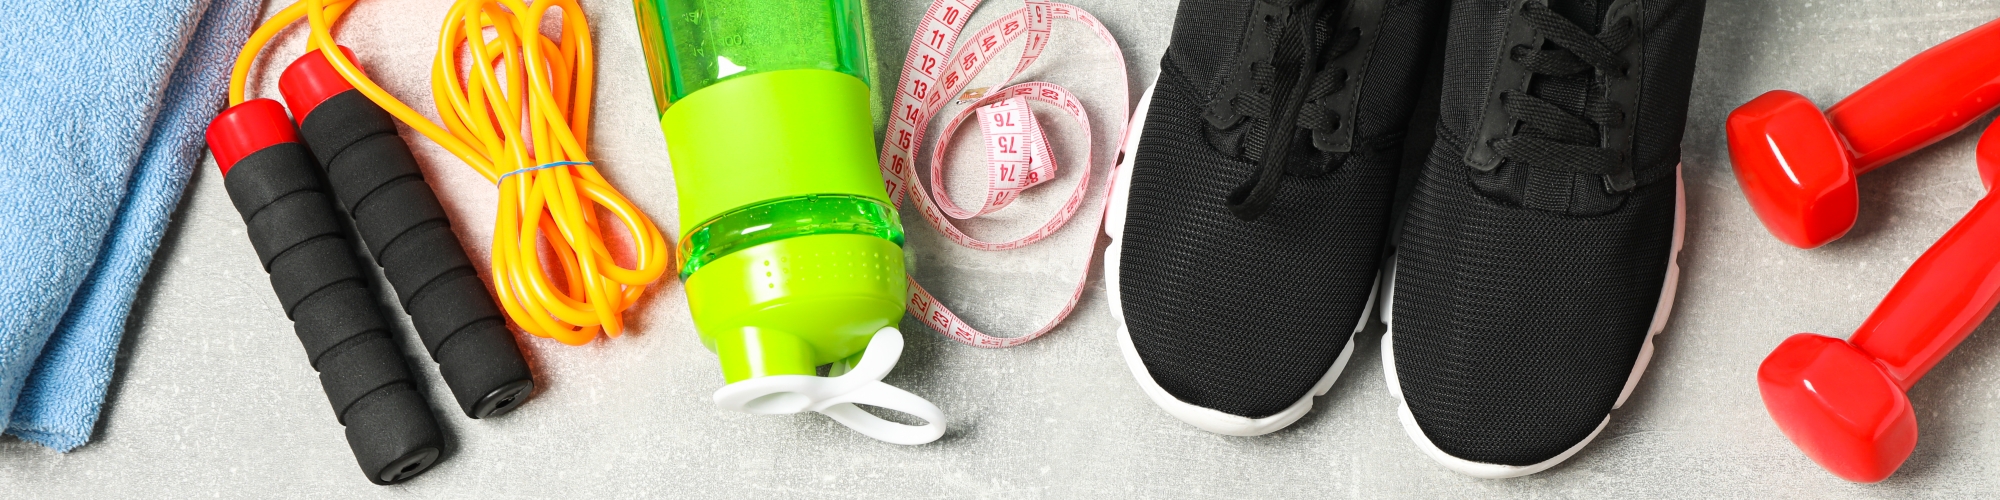 workout gear and health foods